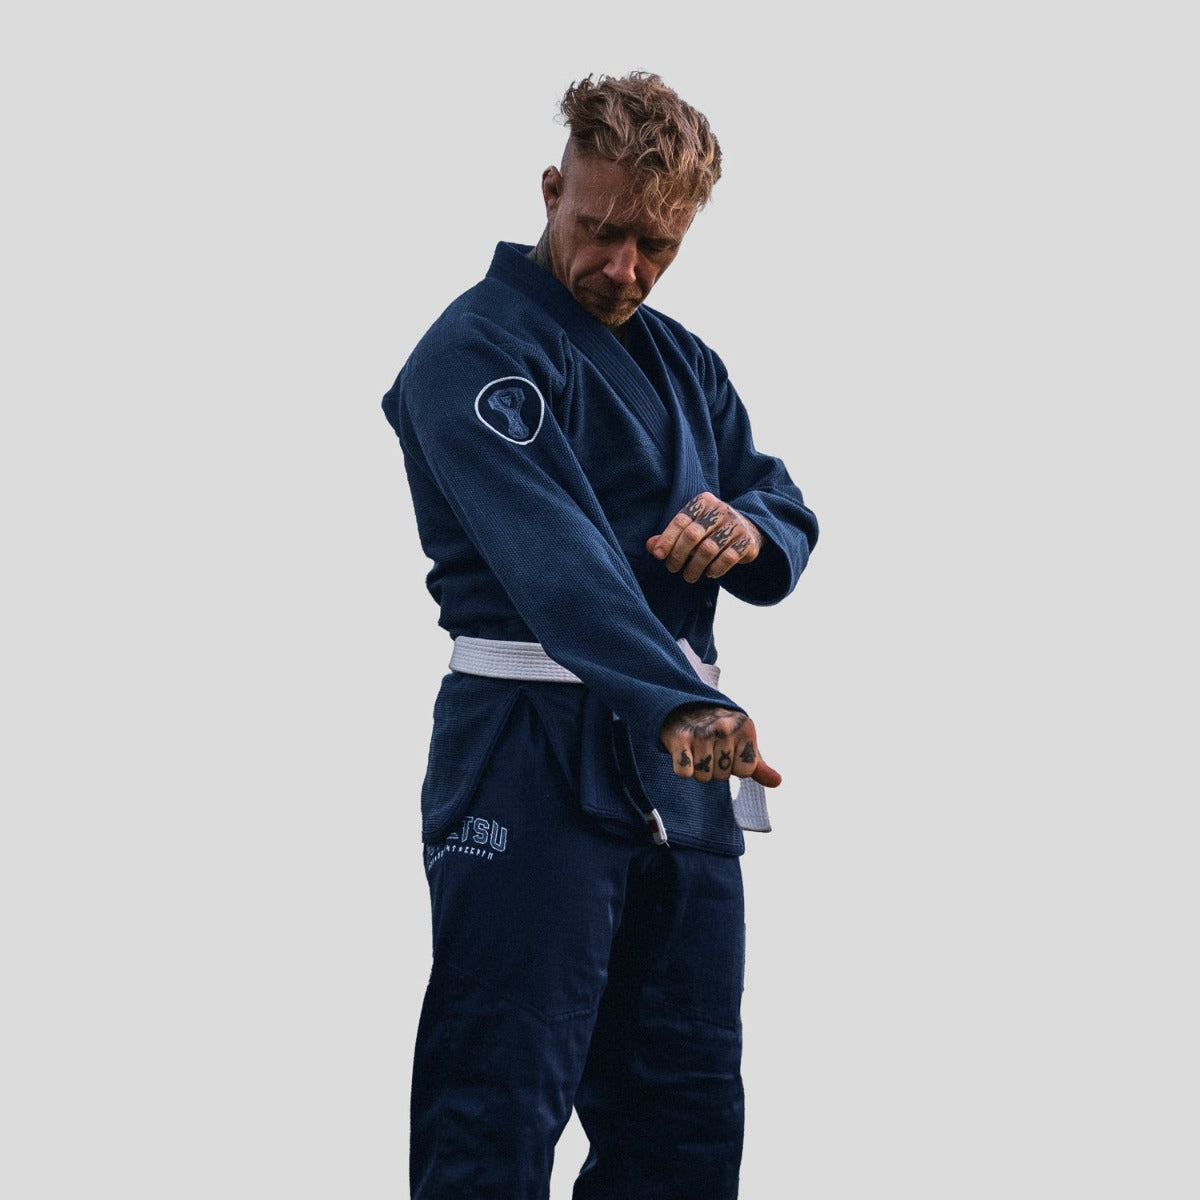 Mens BJJ Gi from Made4Fighters